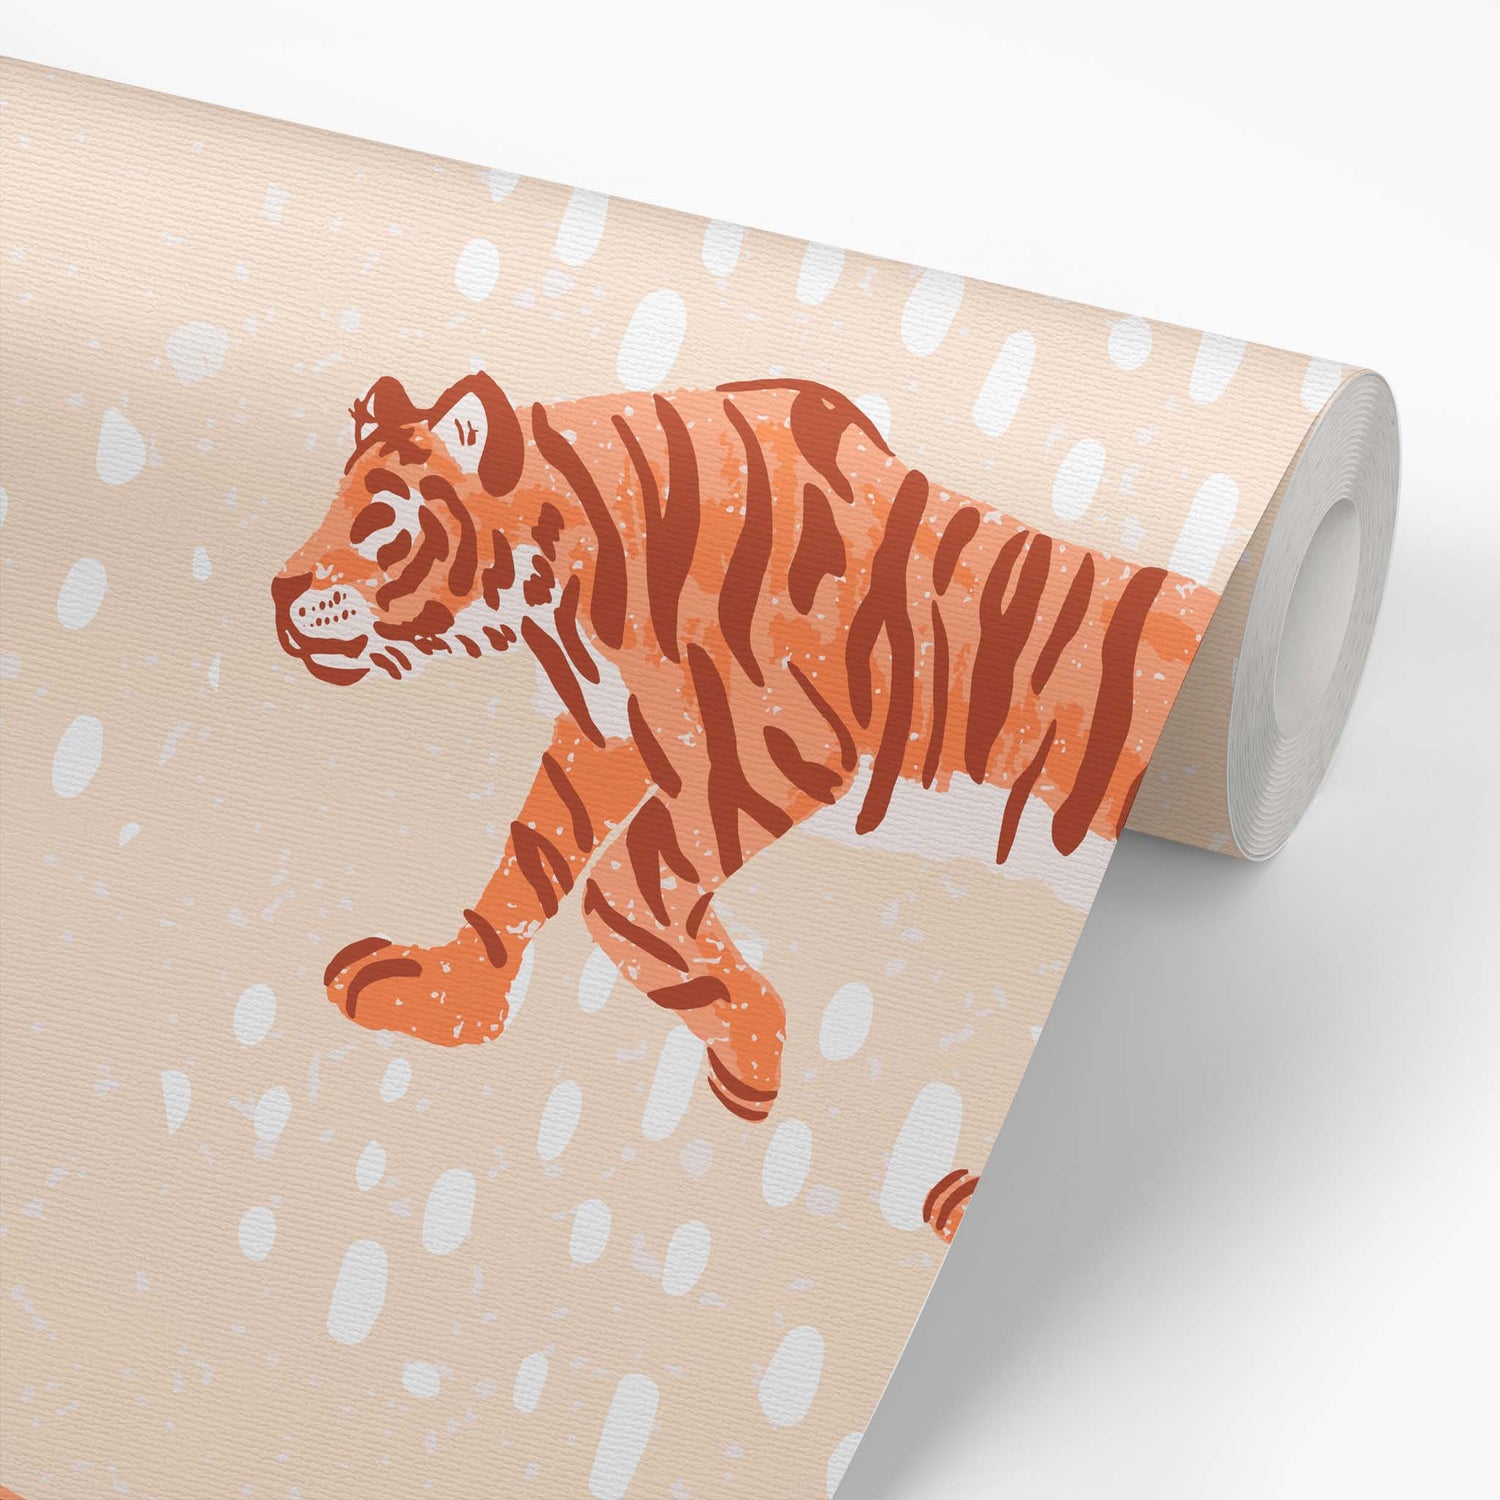 Wallpaper roll of Tiger Meadow- Tan and Orange Wallpaper perfect for a nursery or playroom space.